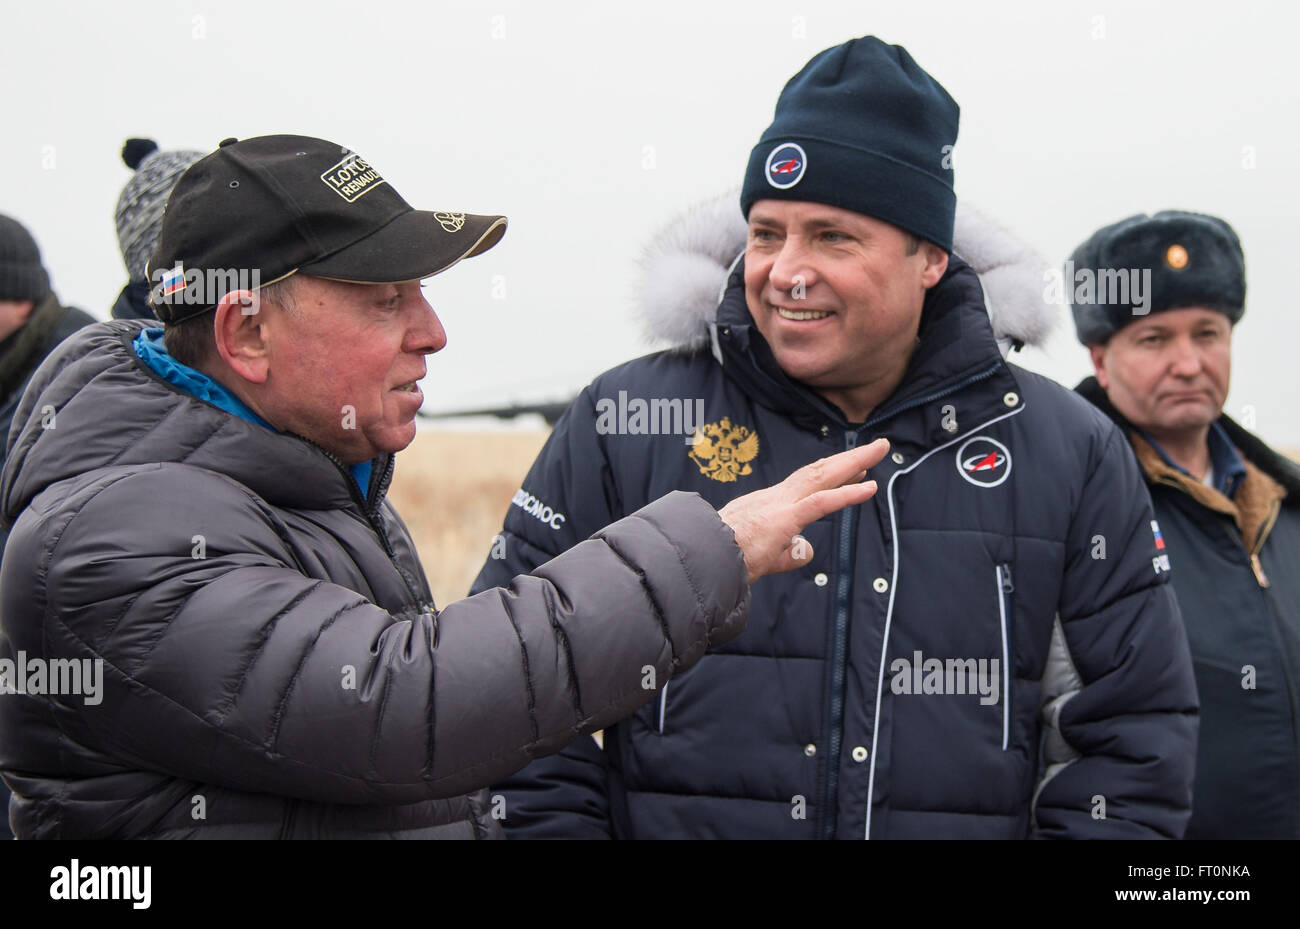 Former cosmonaut and father of Russian cosmonaut Sergey Volkov, Alexander Volkov, left, talks with Head of Roscosmos Igor Komarov as he waits for his son to be extracted from the Soyuz TMA-18M spacecraft with Expedition 46 Commander Scott Kelly of NASA and Russian cosmonaut Mikhail Kornienko near the town of Zhezkazgan, Kazakhstan on Wednesday, March 2, 2016 (Kazakh time). Kelly and Kornienko completed an International Space Station record year-long mission to collect valuable data on the effect of long duration weightlessness on the human body that will be used to formulate a human mission to Stock Photo